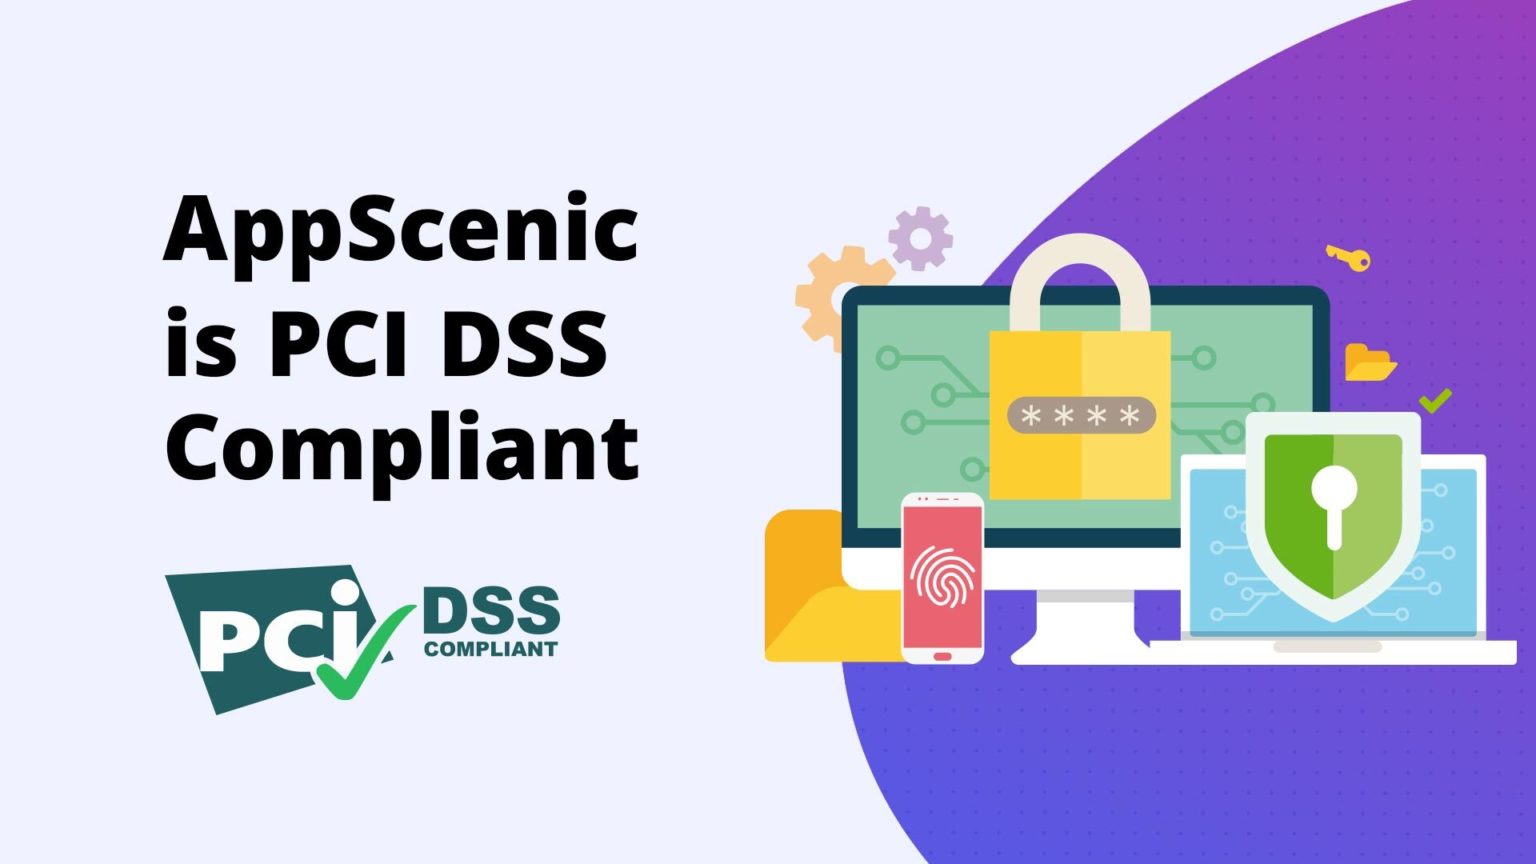 AppScenic is PCI DSS compliant -  